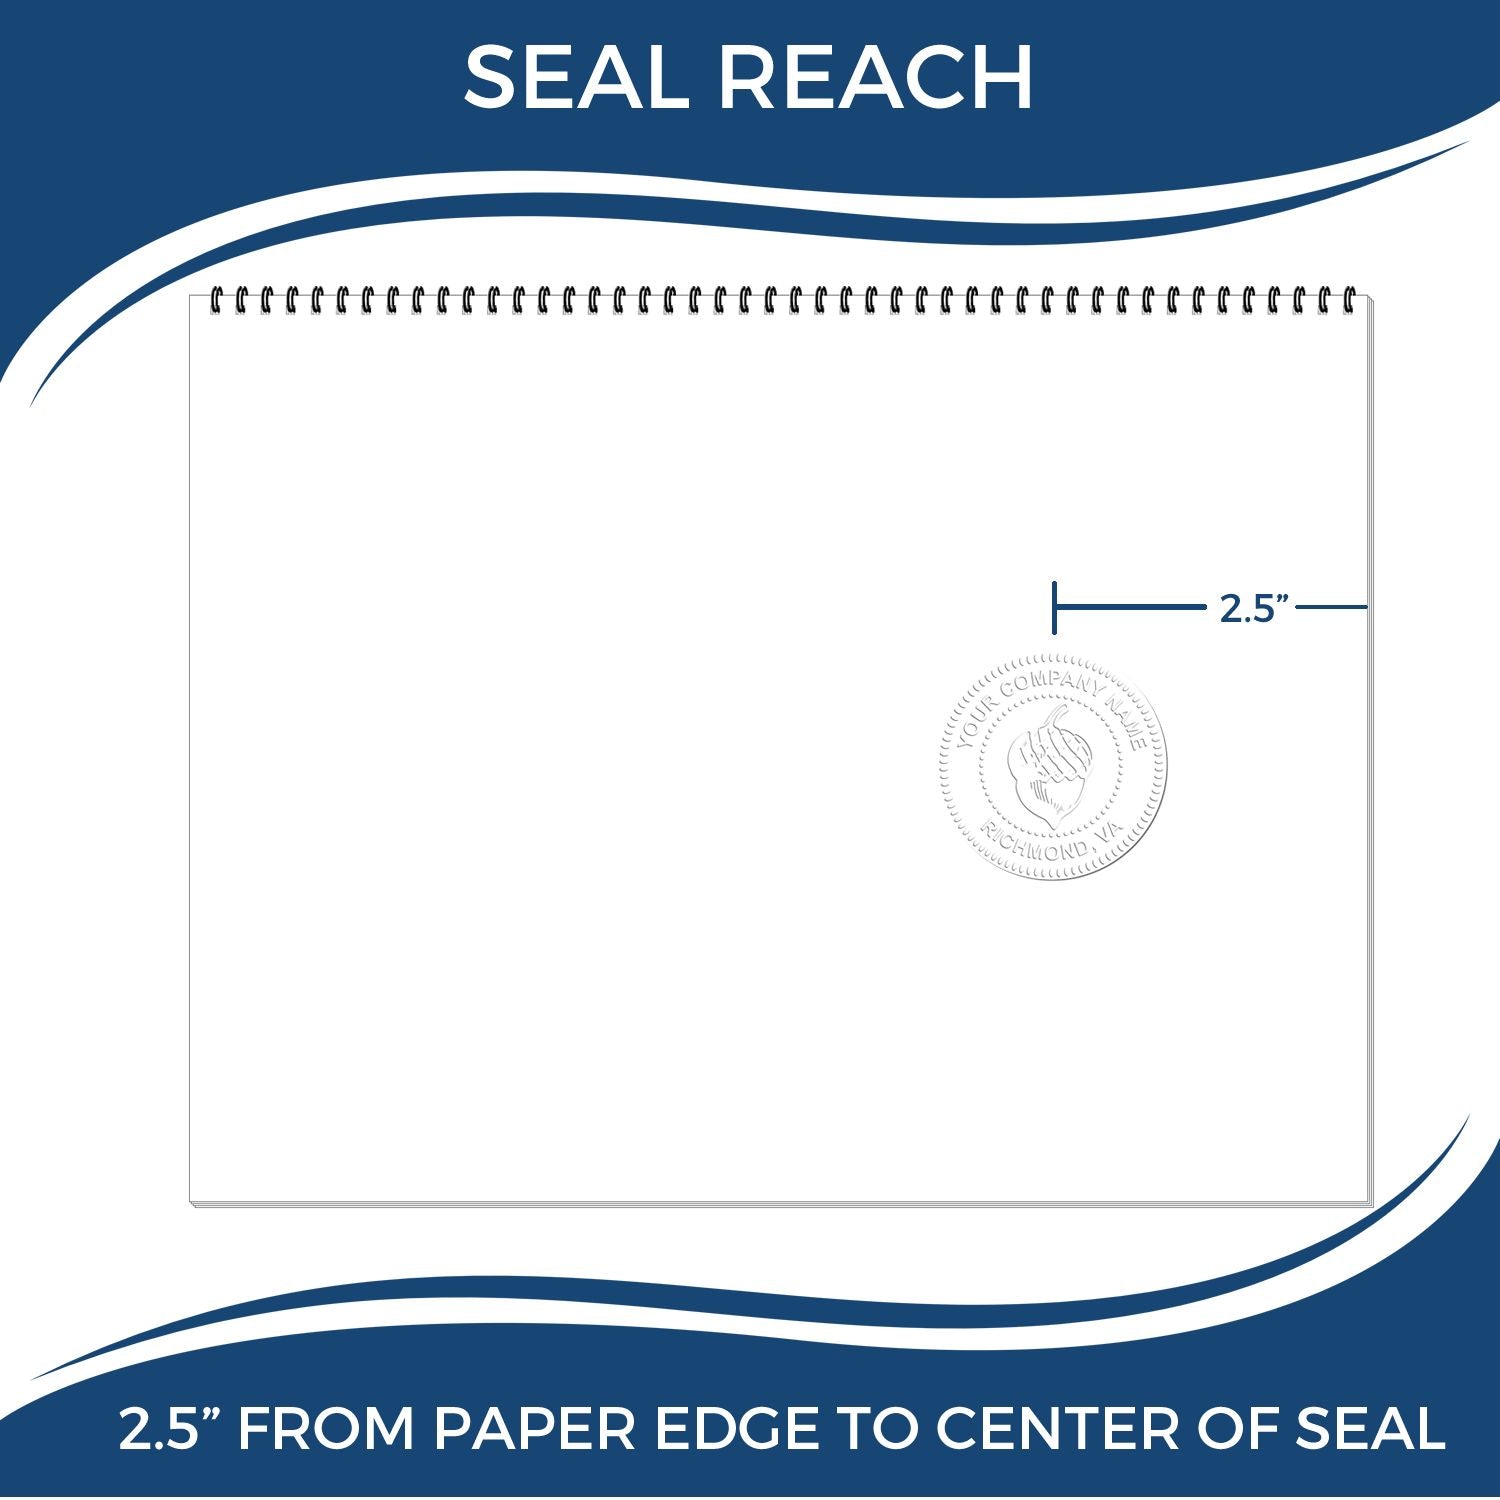 An infographic showing the seal reach which is represented by a ruler and a miniature seal image of the State of Kansas Long Reach Architectural Embossing Seal